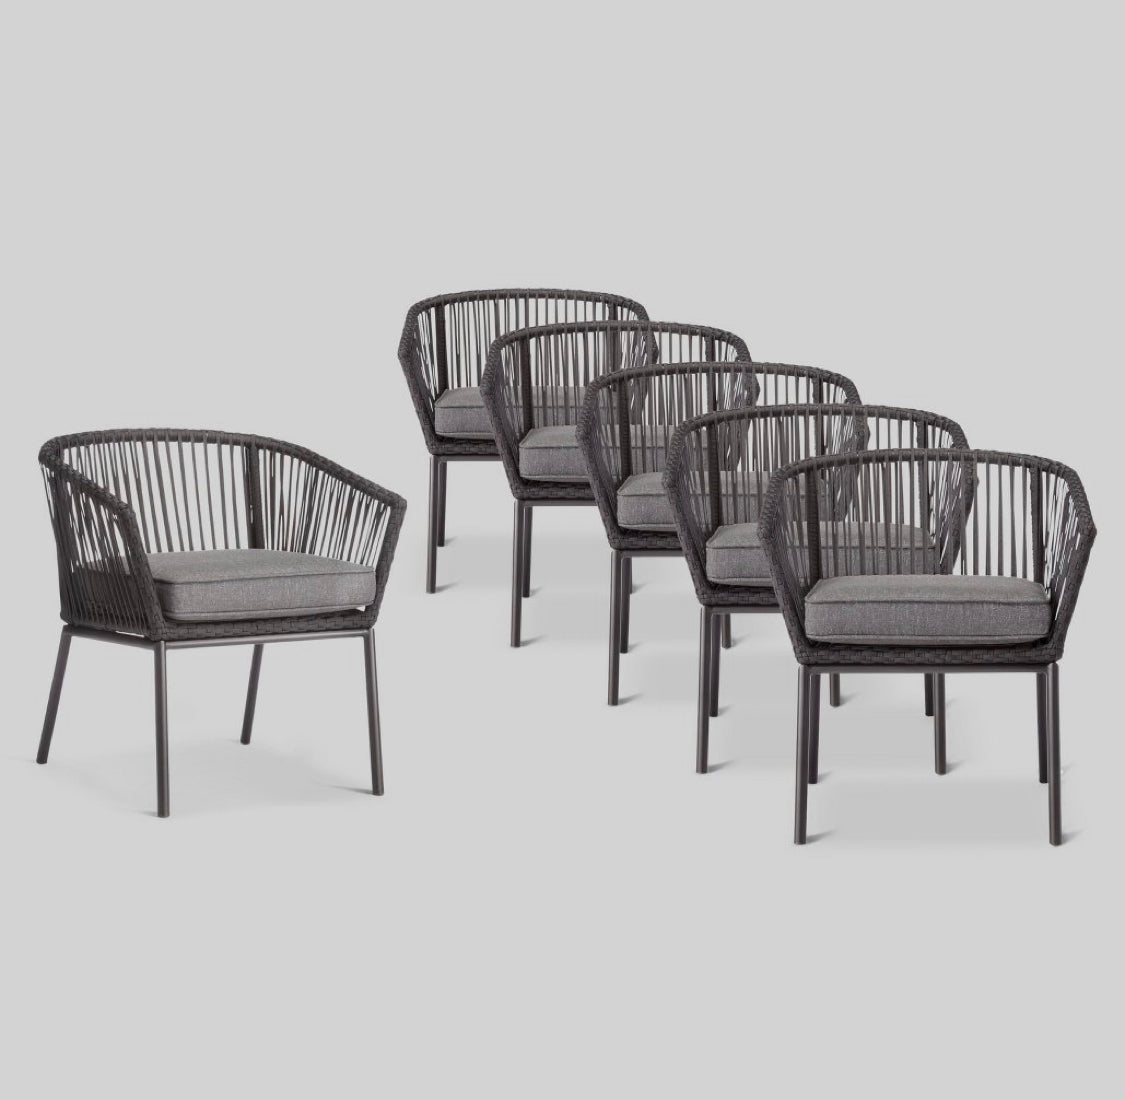 Standish 6pk Patio Dining Chair #4227